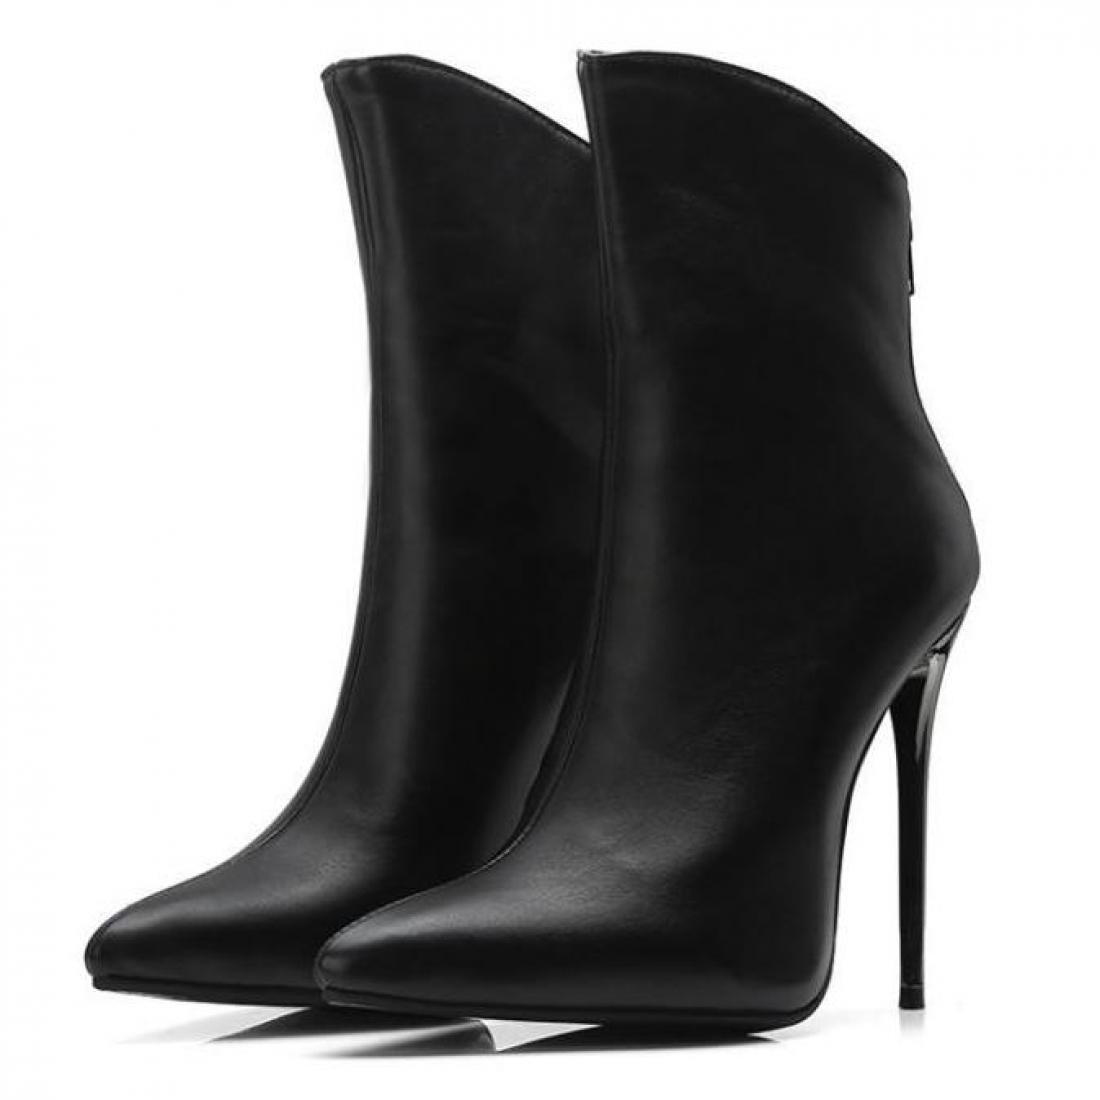 Black Pointed Head MId Long High Stiletto Heels Boots Shoes ...